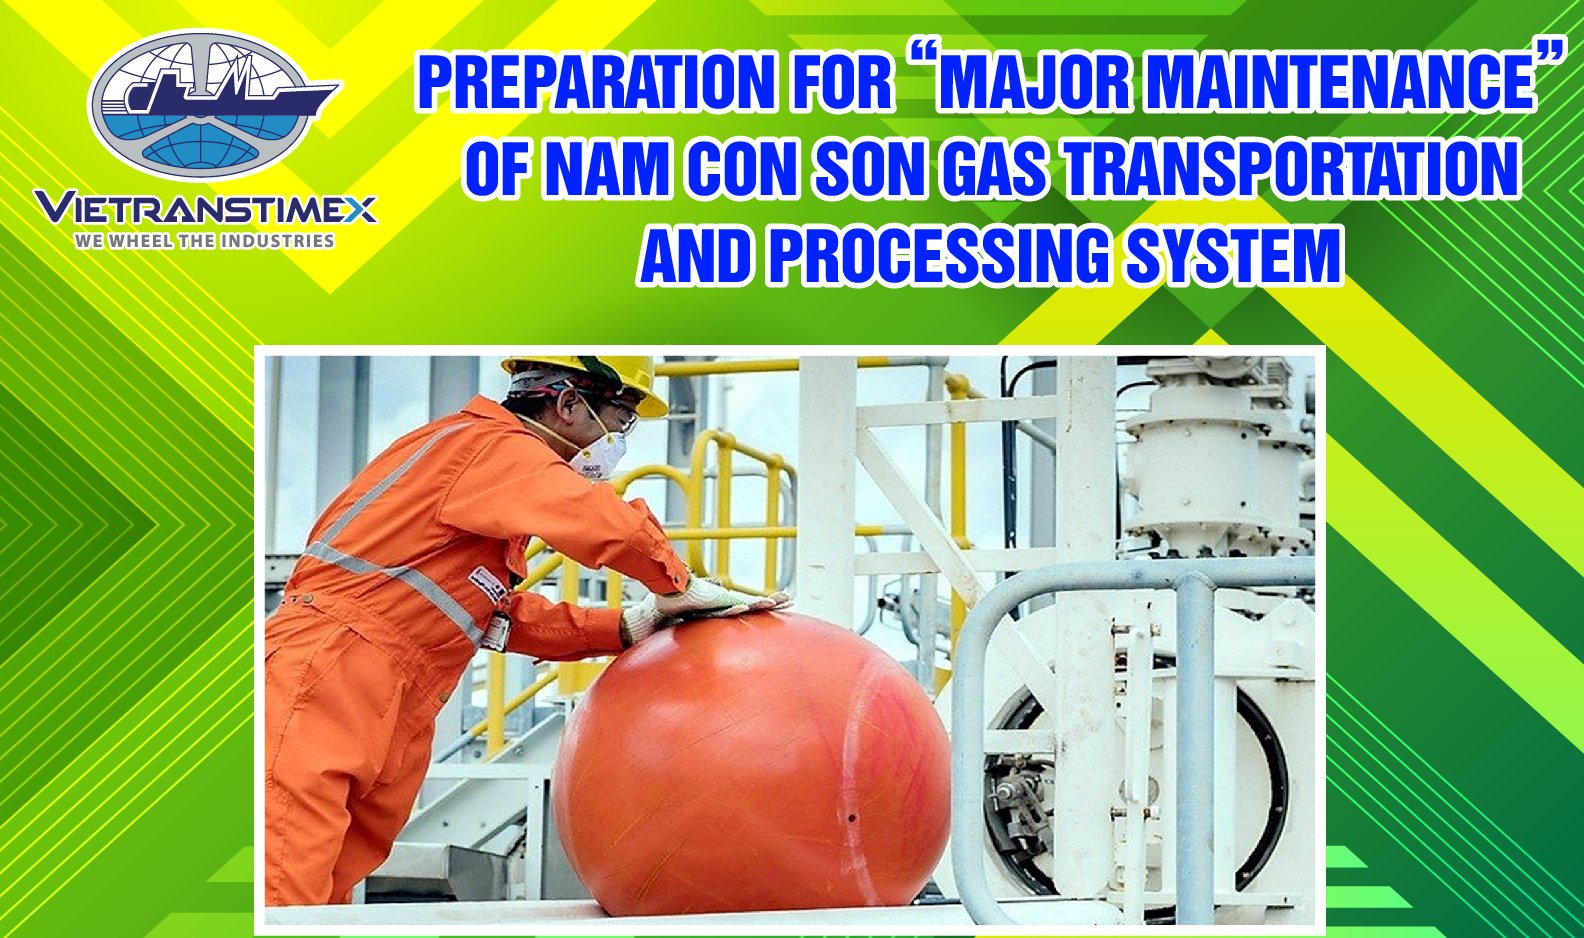 Preparation For “Major Maintenance” Of Nam Con Son Gas Transportation And Processing System